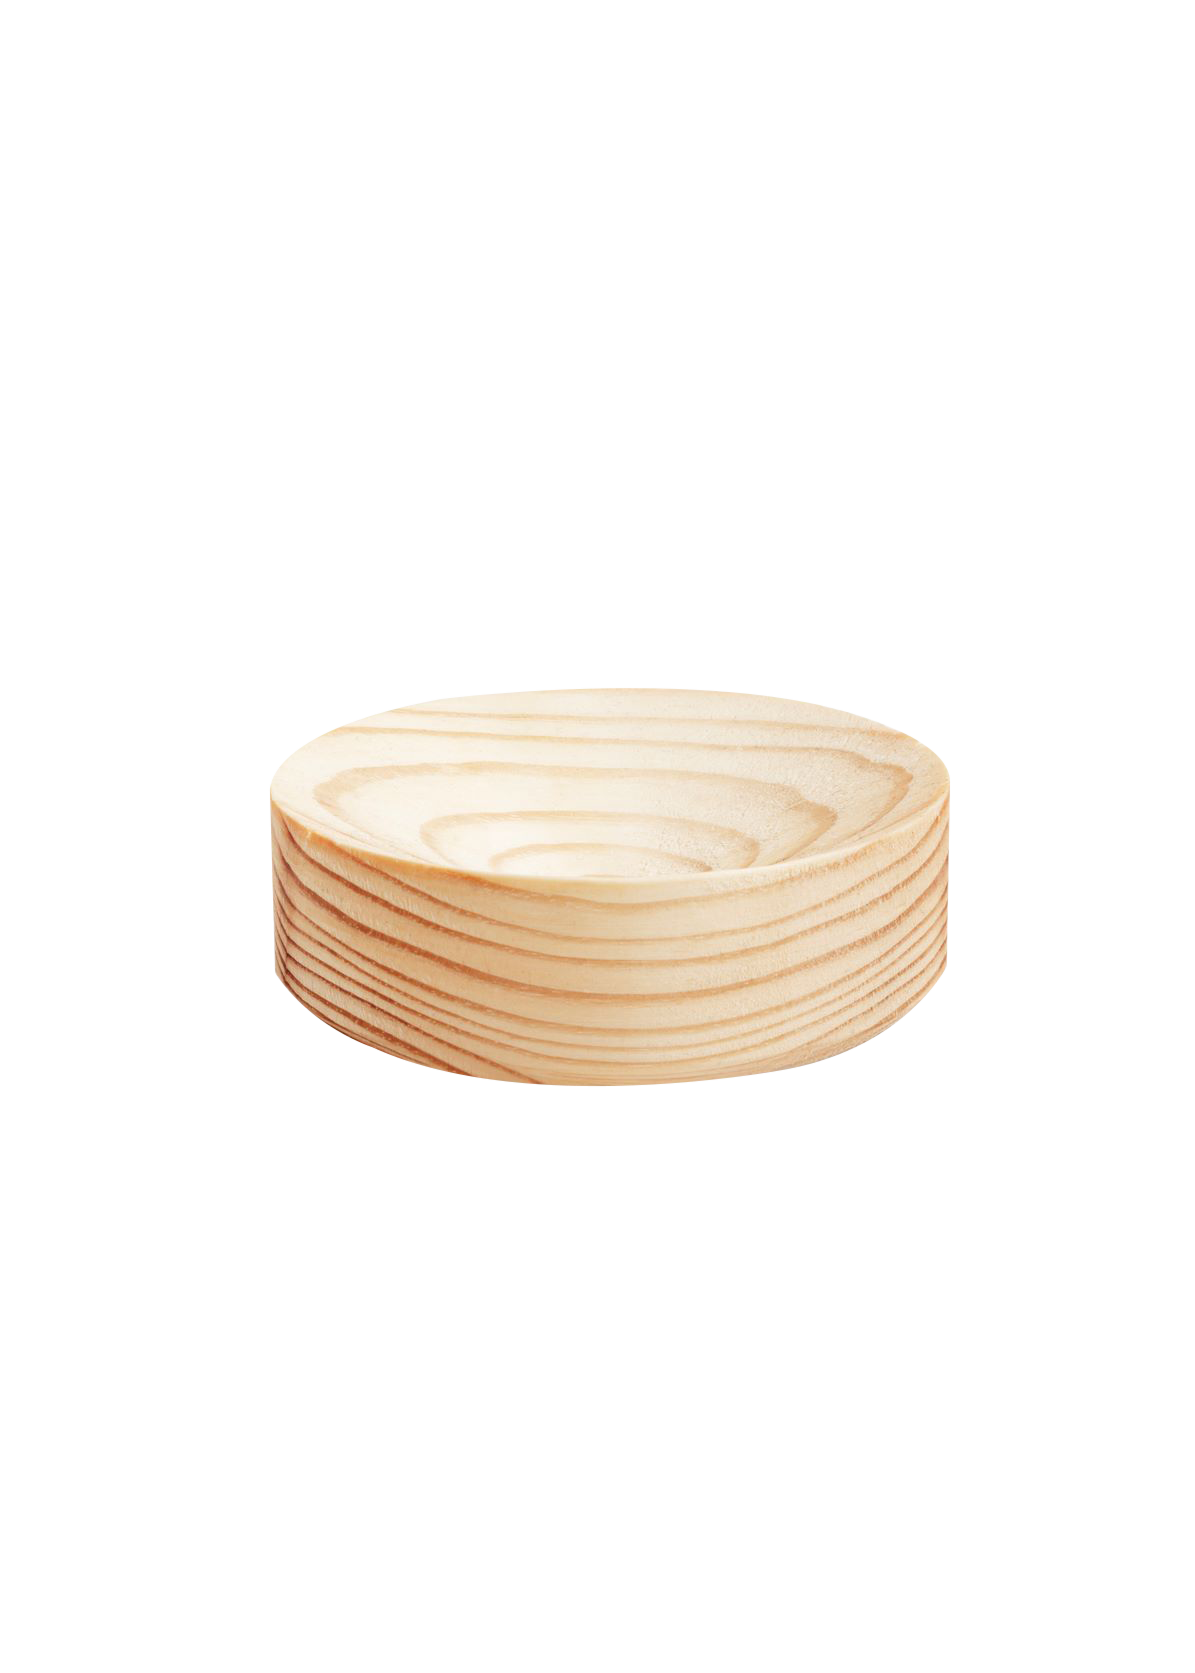 pine soap plate natural round